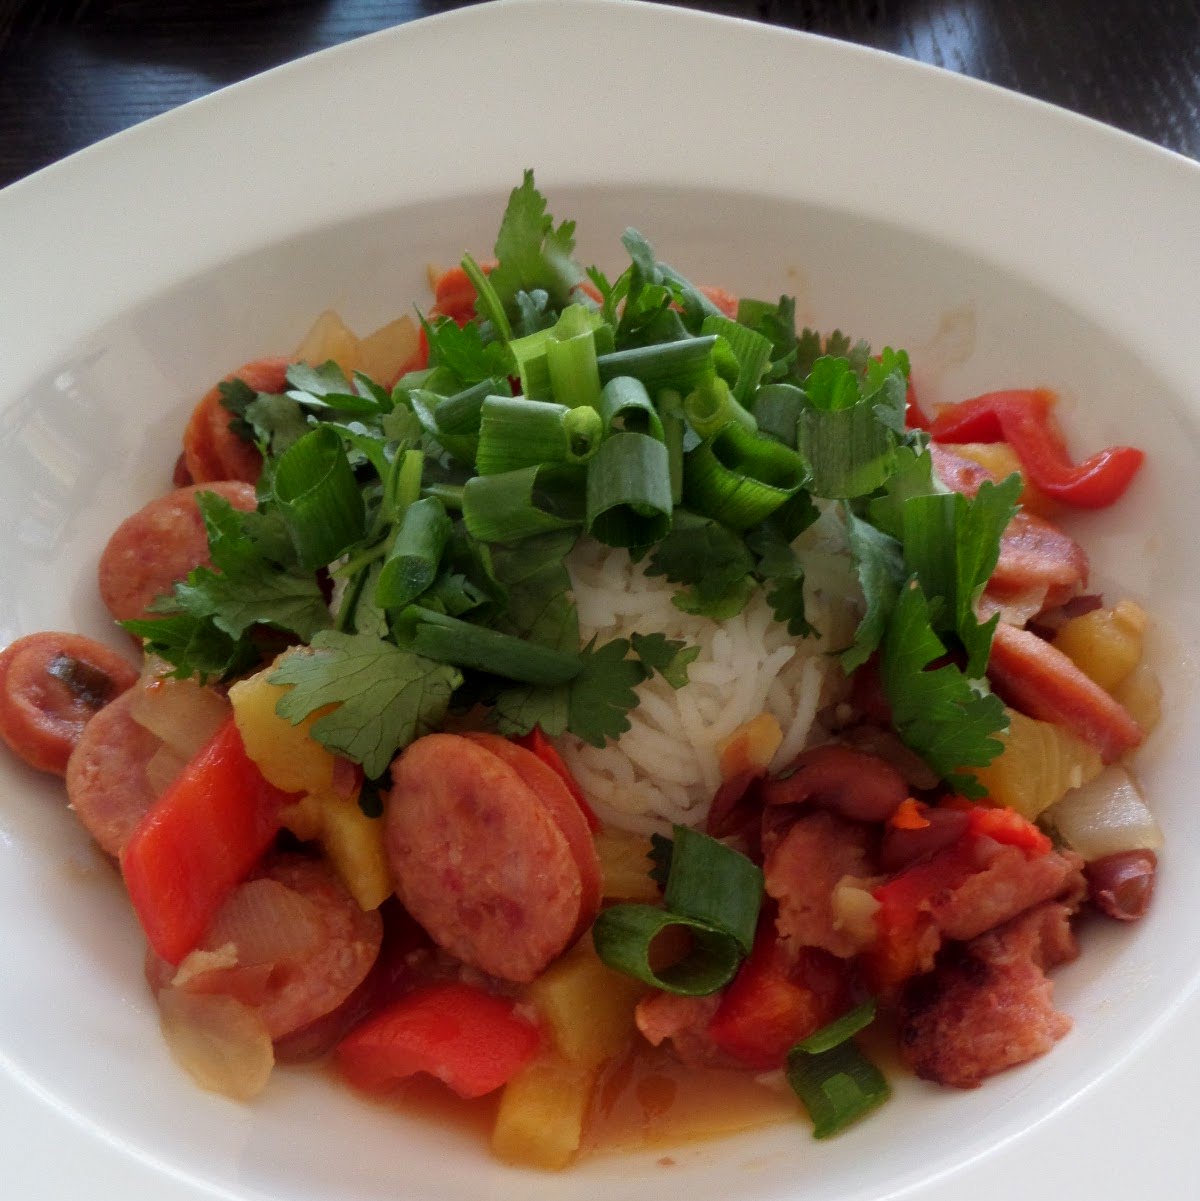 Sausage and Bean Sweet and Sour:  Pineapple sausage and beans in a spicy sweet and sour sauce served over rice.